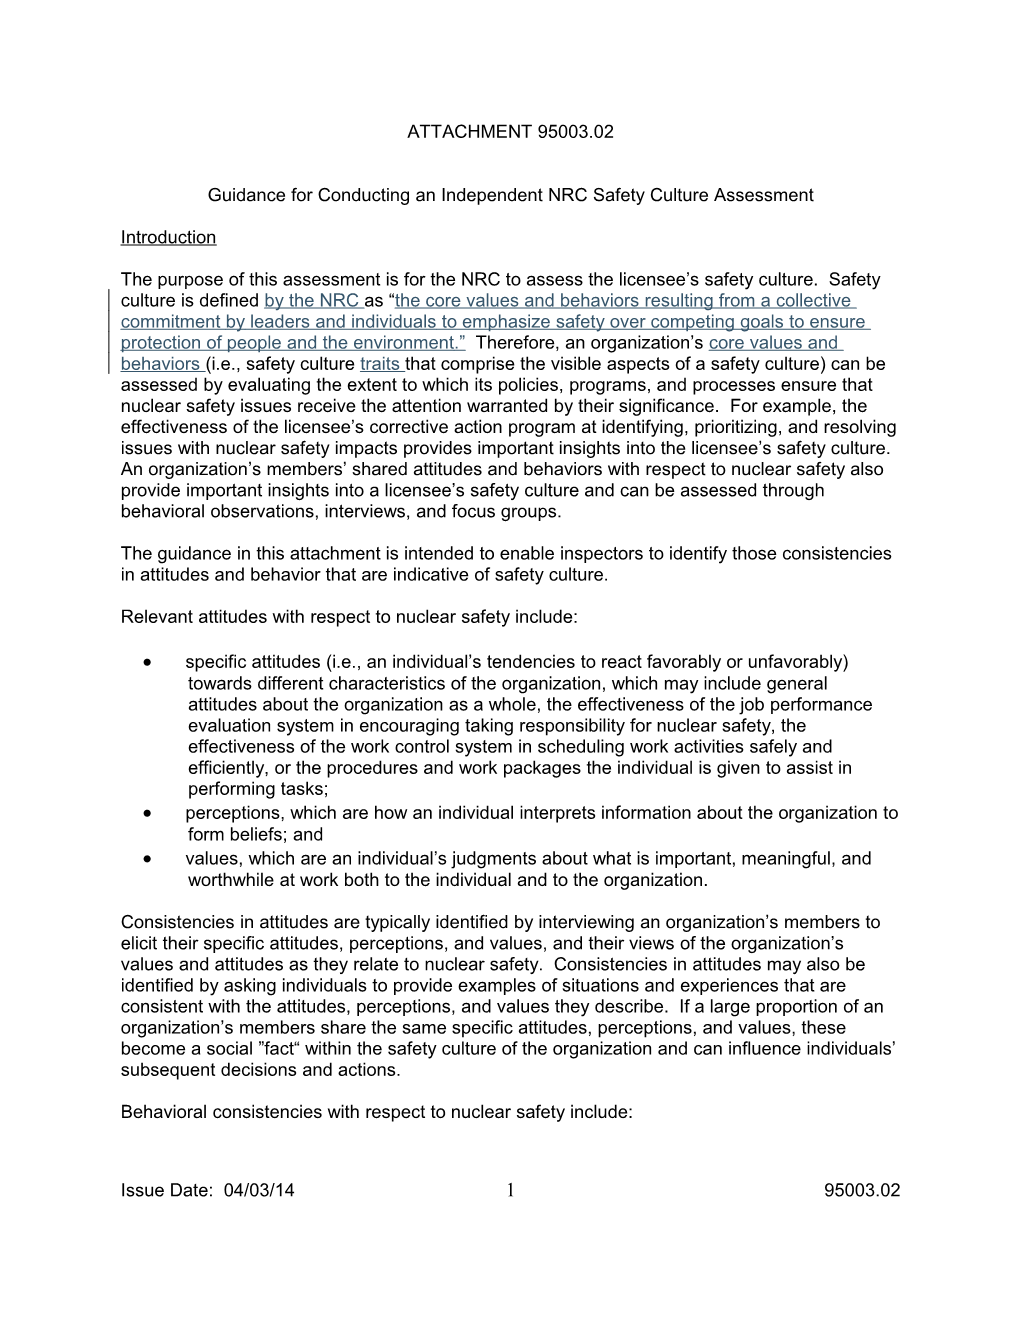 Guidance for Conducting an Independent NRC Safety Culture Assessment